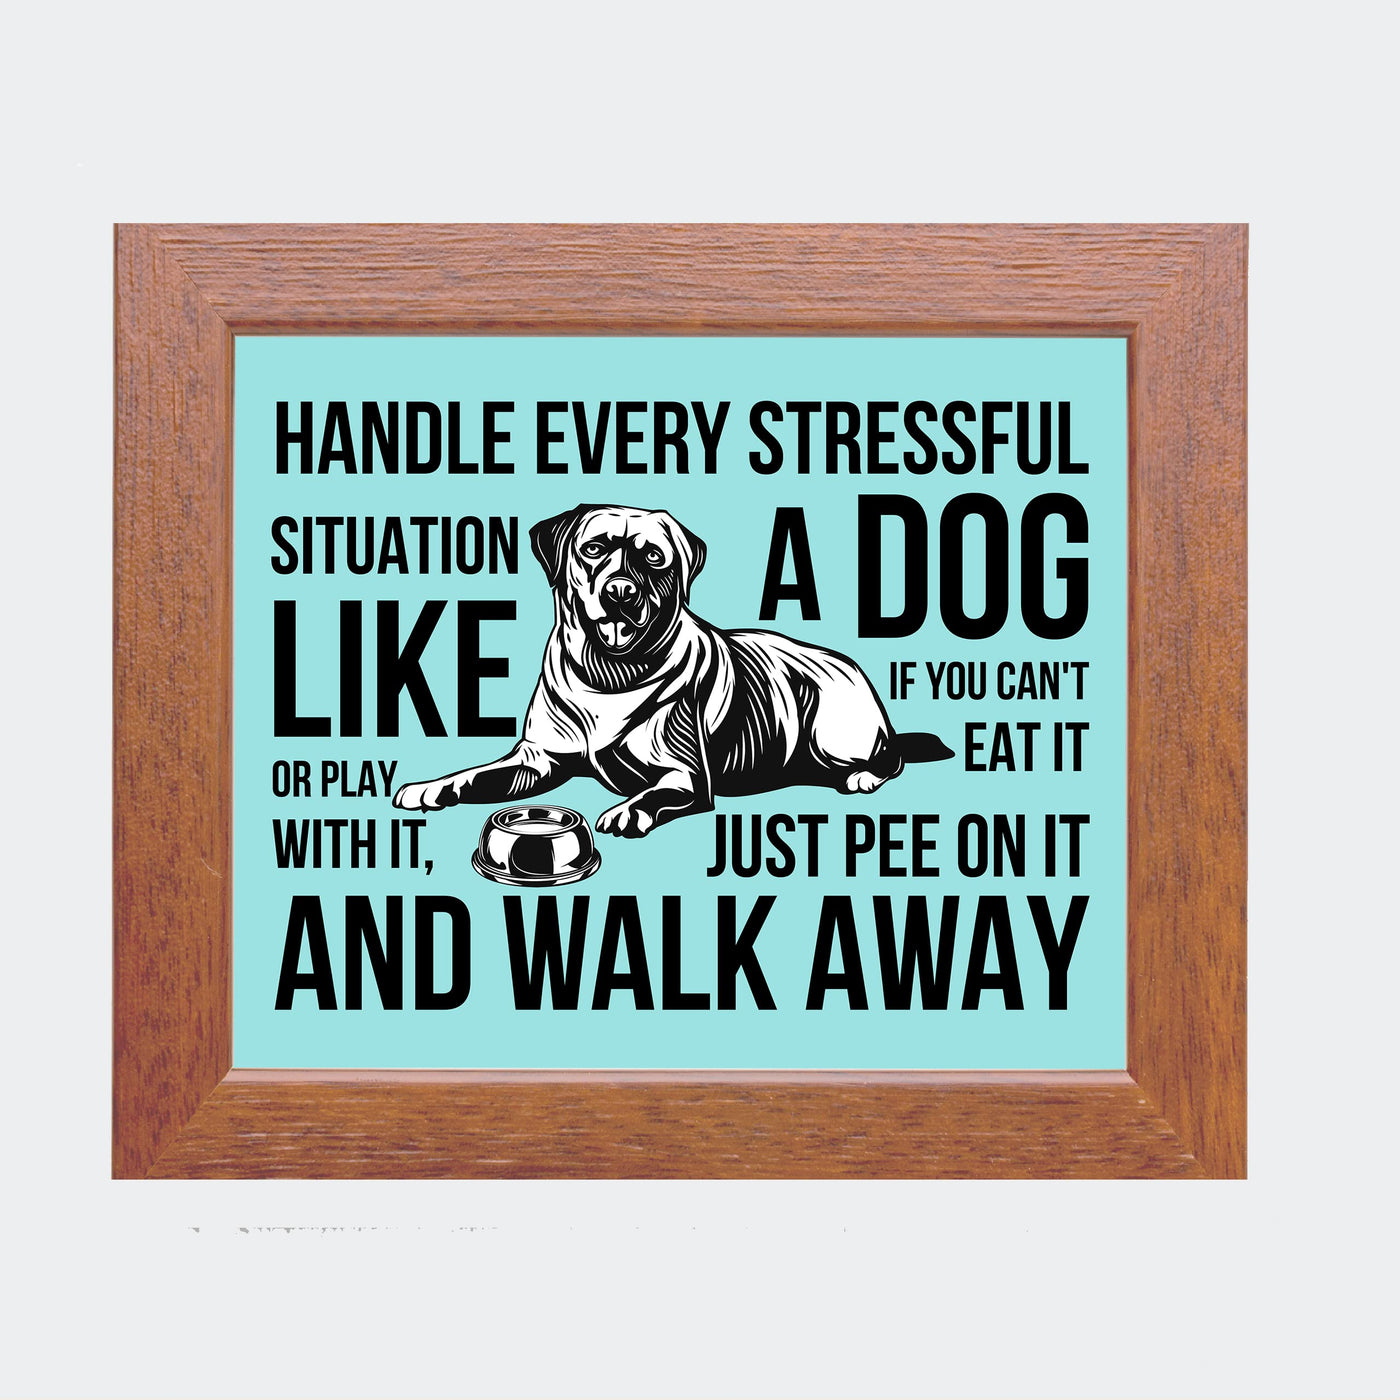 Handle Every Situation Like A Dog-Pee On It & Walk Away- Funny Dogs Wall Art Sign -10 x 8" Rustic Pets Wall Decor Print -Ready to Frame. Home-Office-Vet Clinic Decor. Great Gift for Dog Owners!